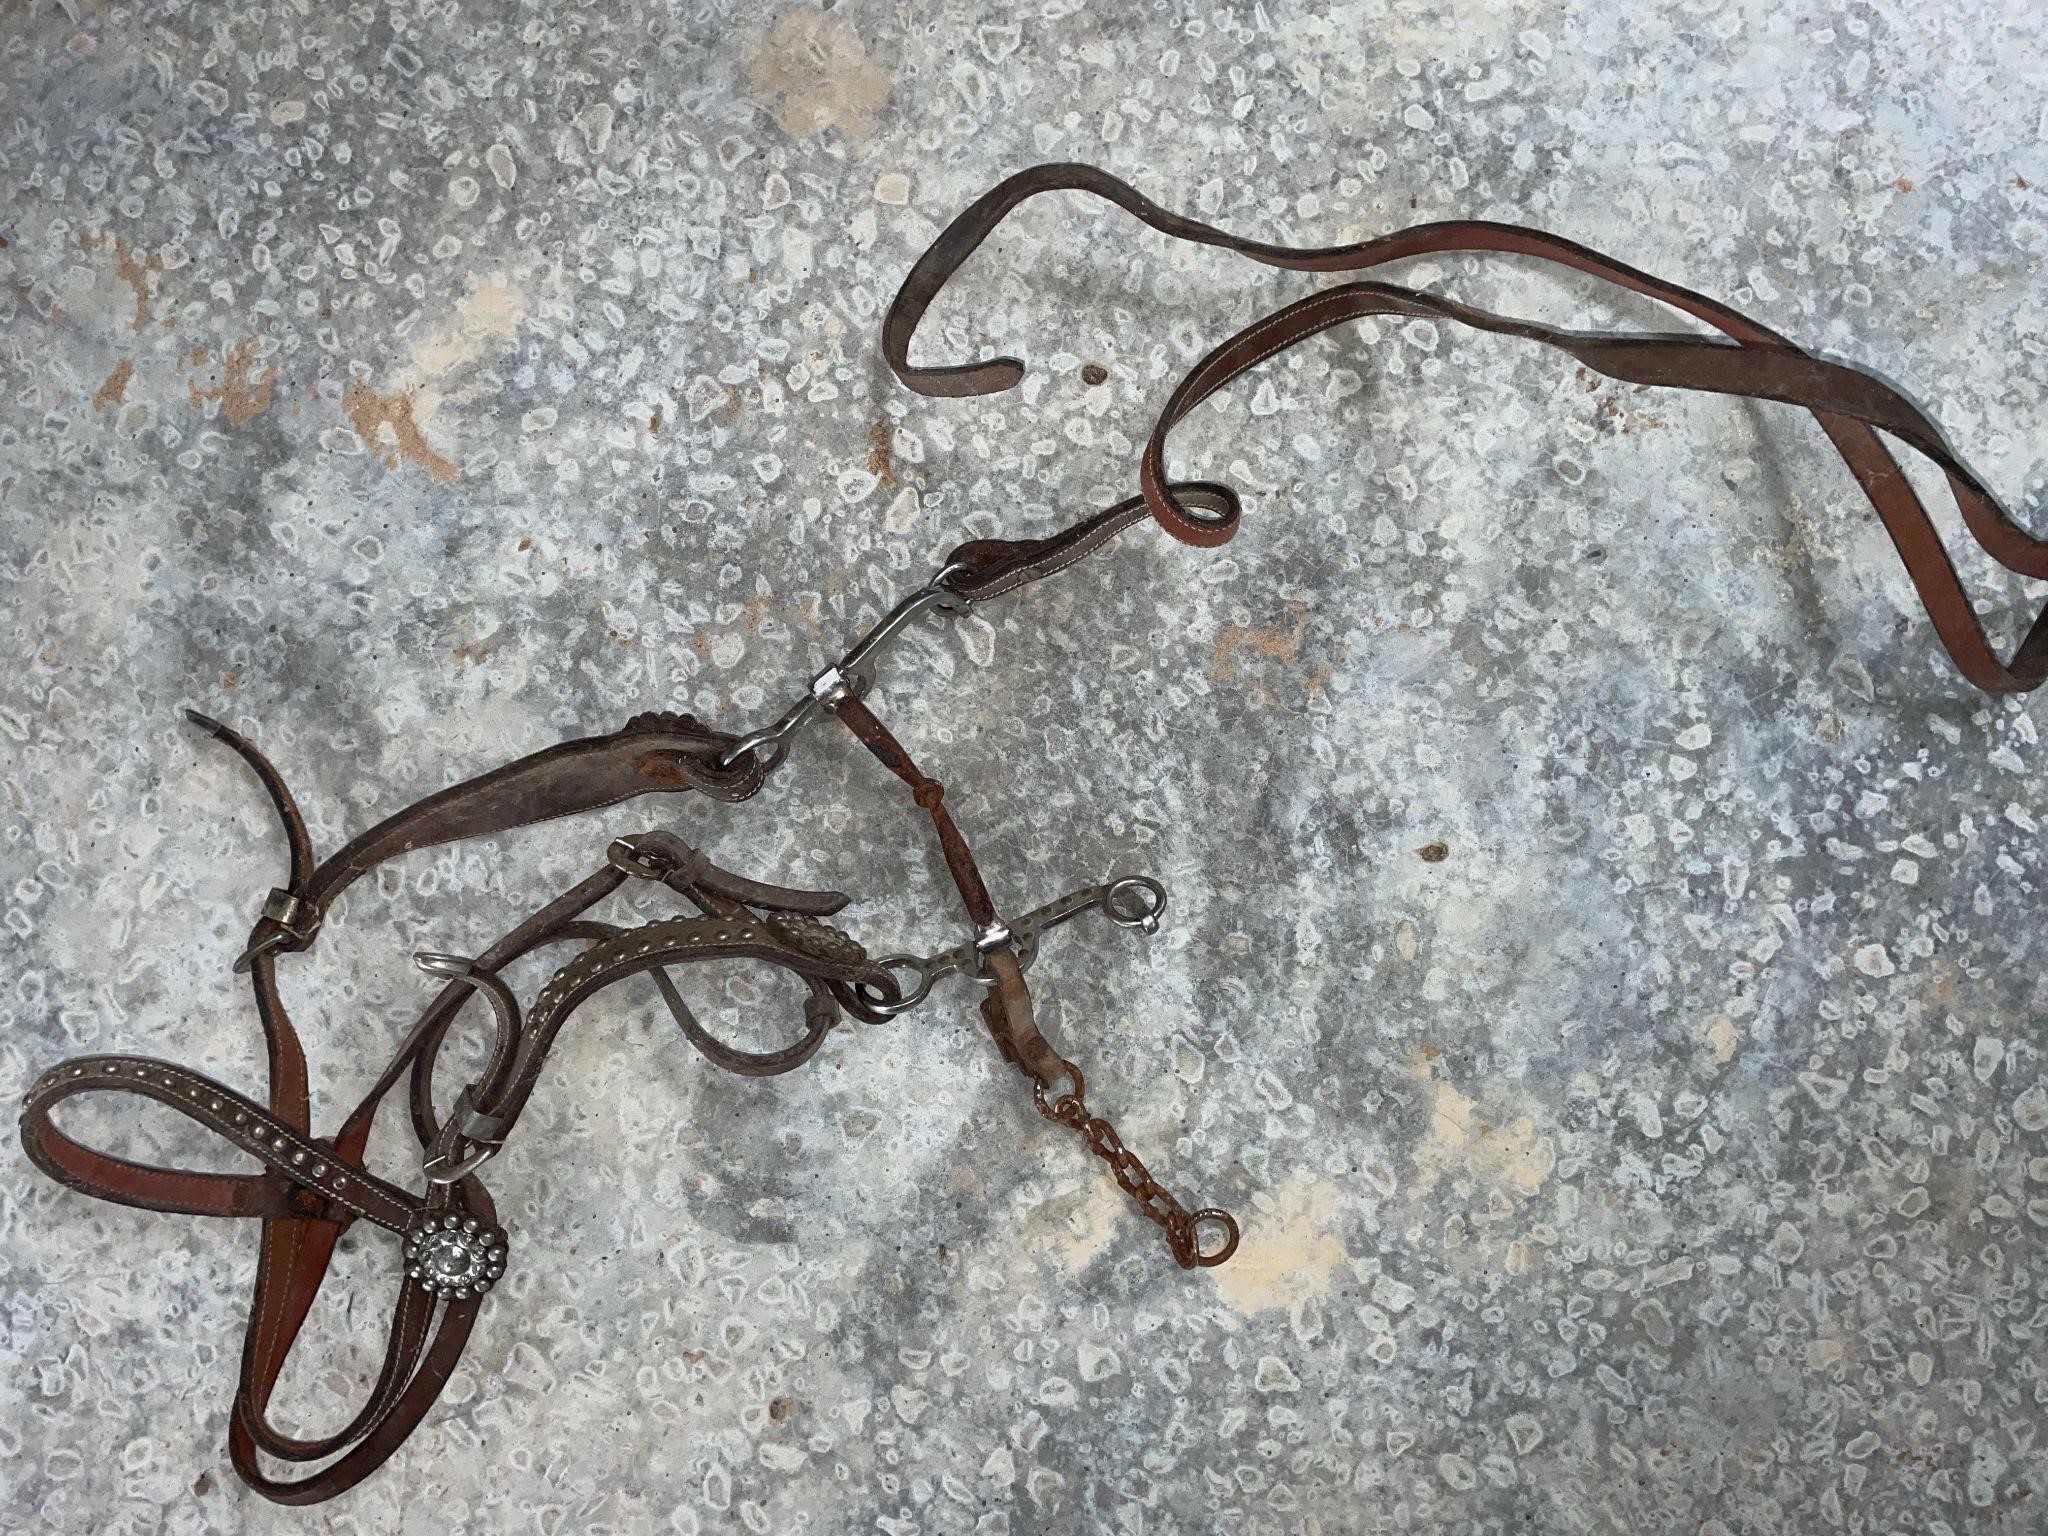 Bridle (very dry) - being sold for bit & hardware